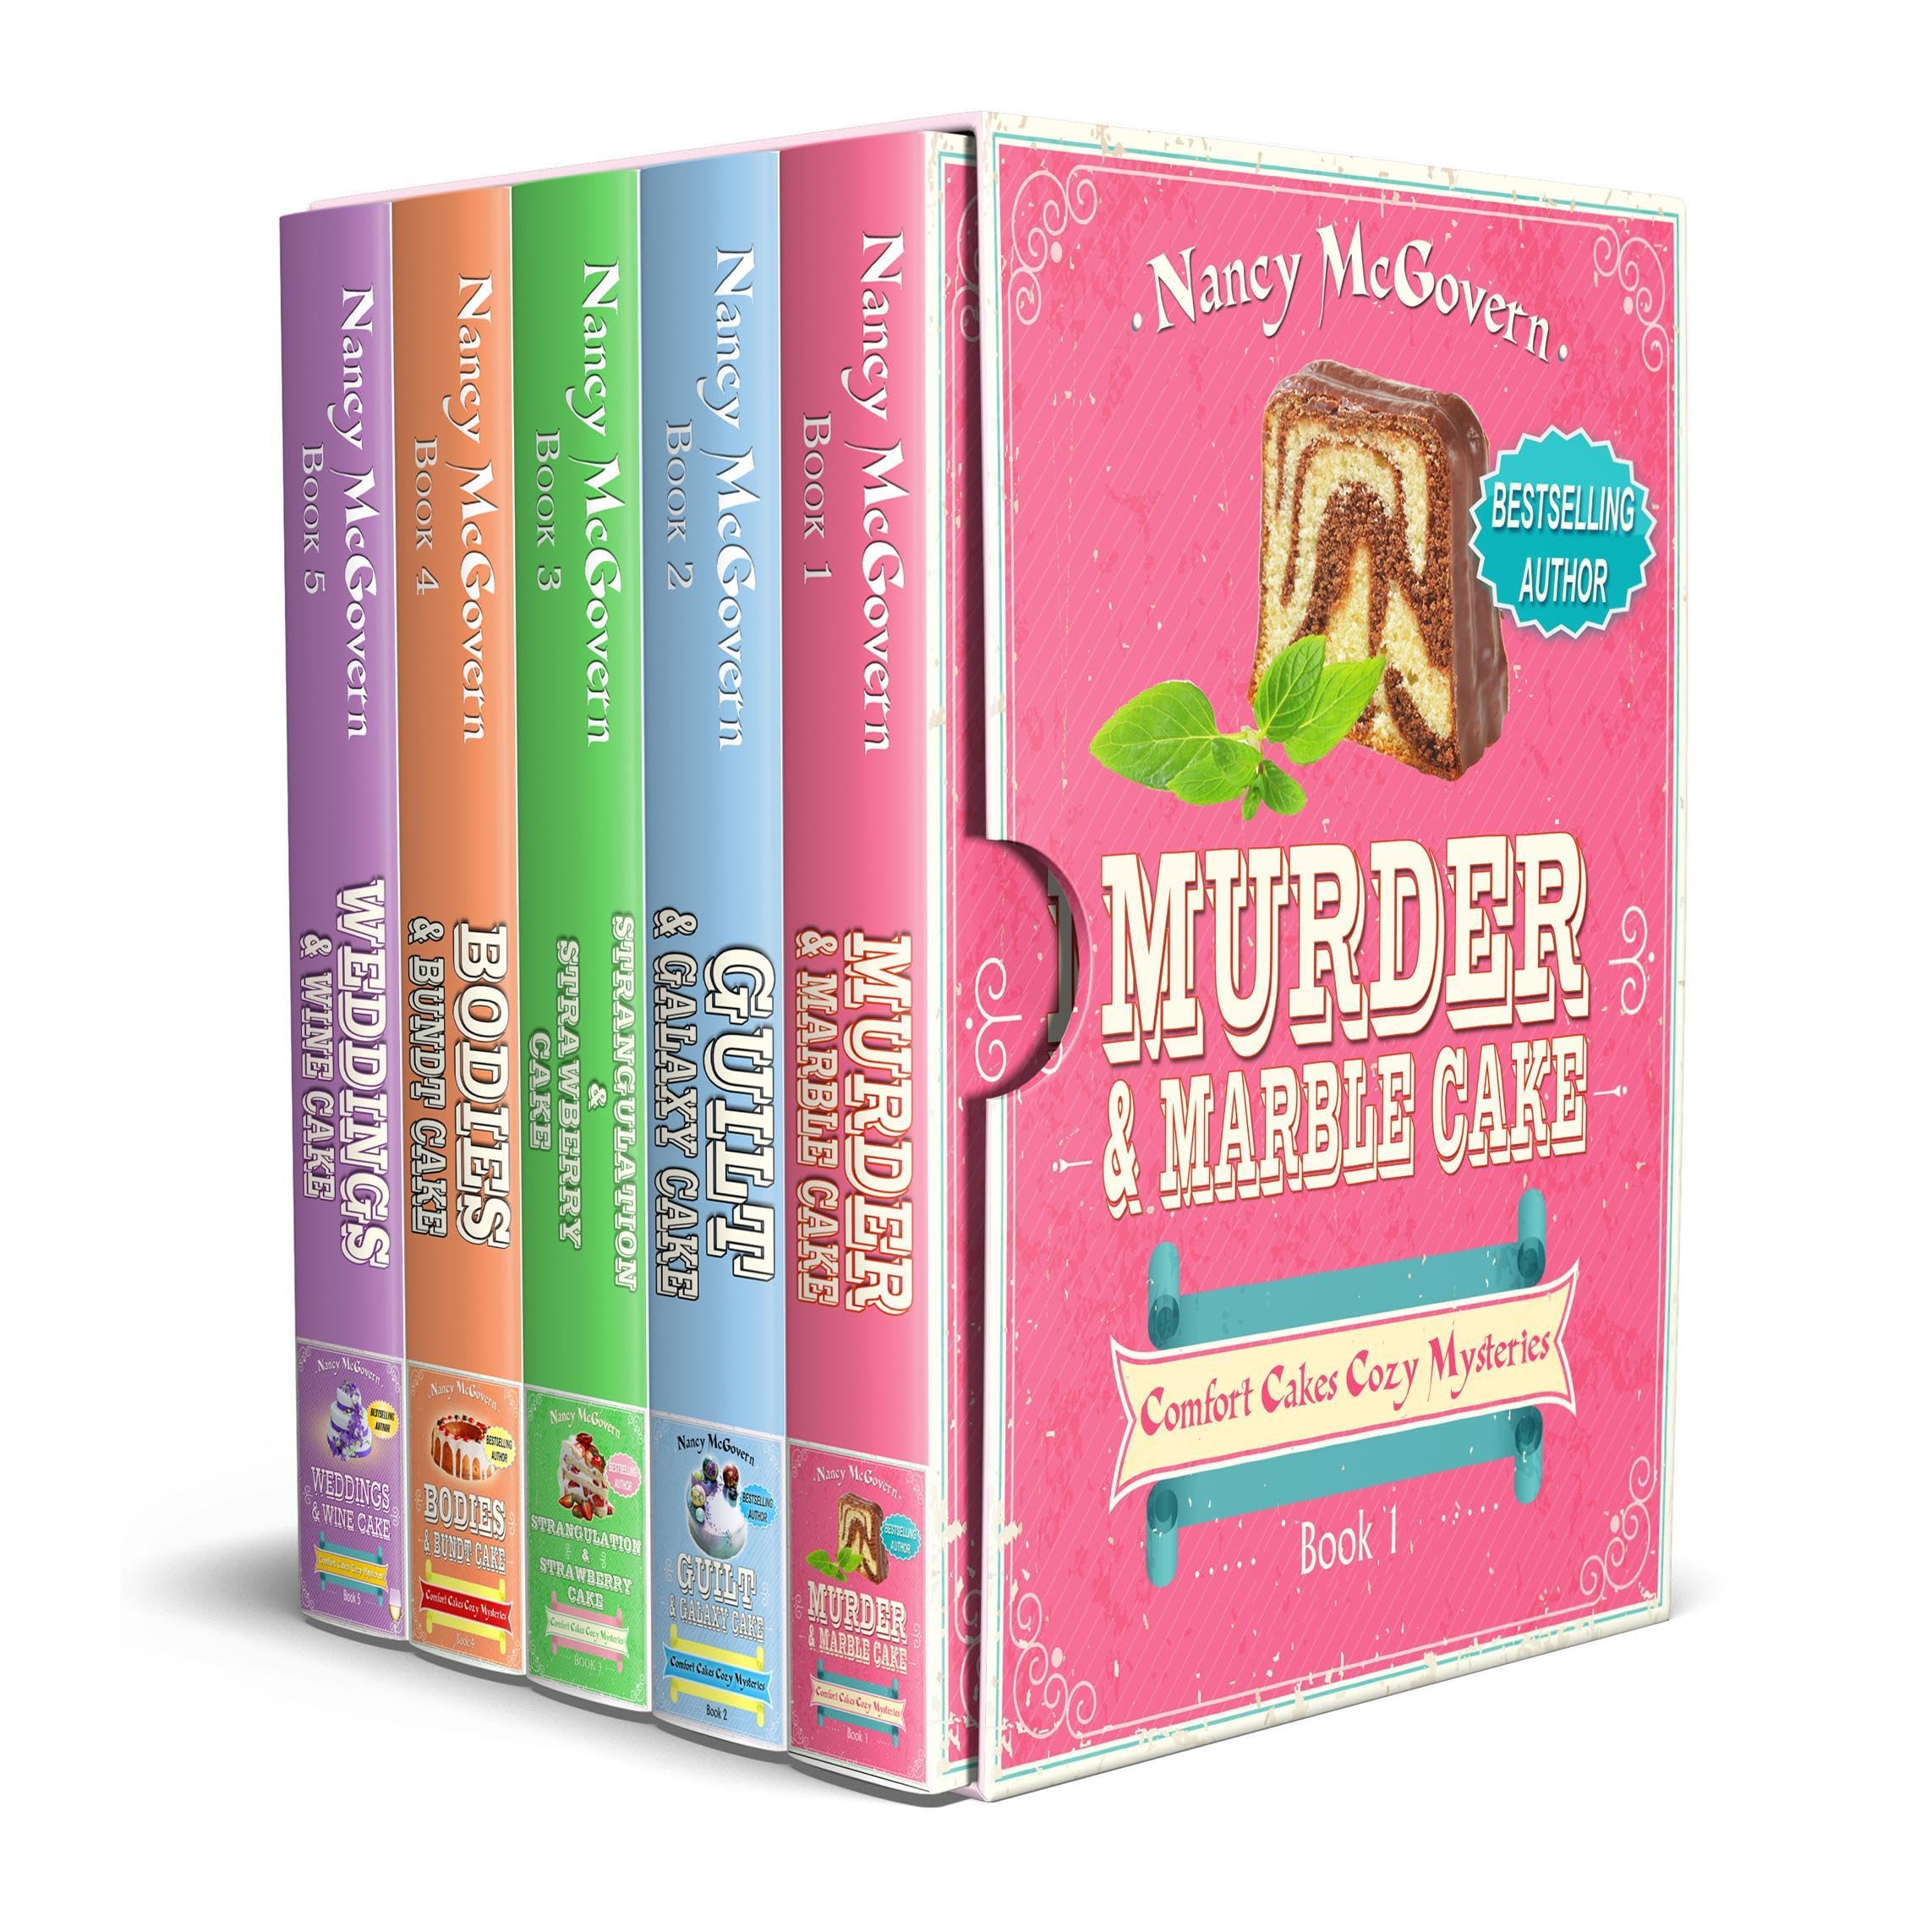 Comfort Cakes Cozy Mysteries, The Complete Series: A 5 Book Box Set With 5 Delicious Cake Recipes